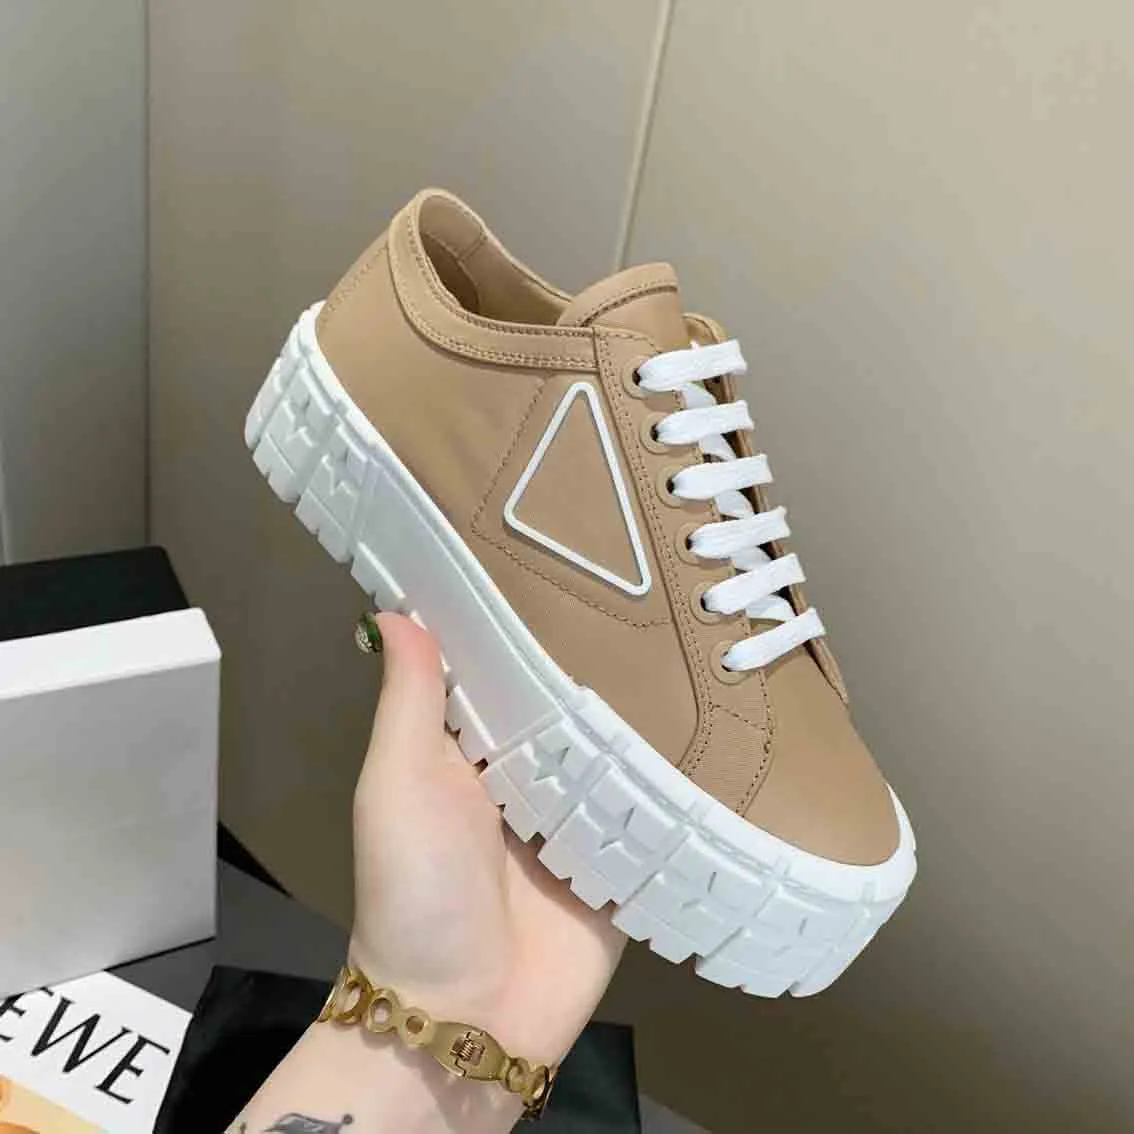 rubber platform women men casual shoes sneaker inspired by motocross tires defines the design of nylon gabardine sneakers this logo triangle decorate50 mm box